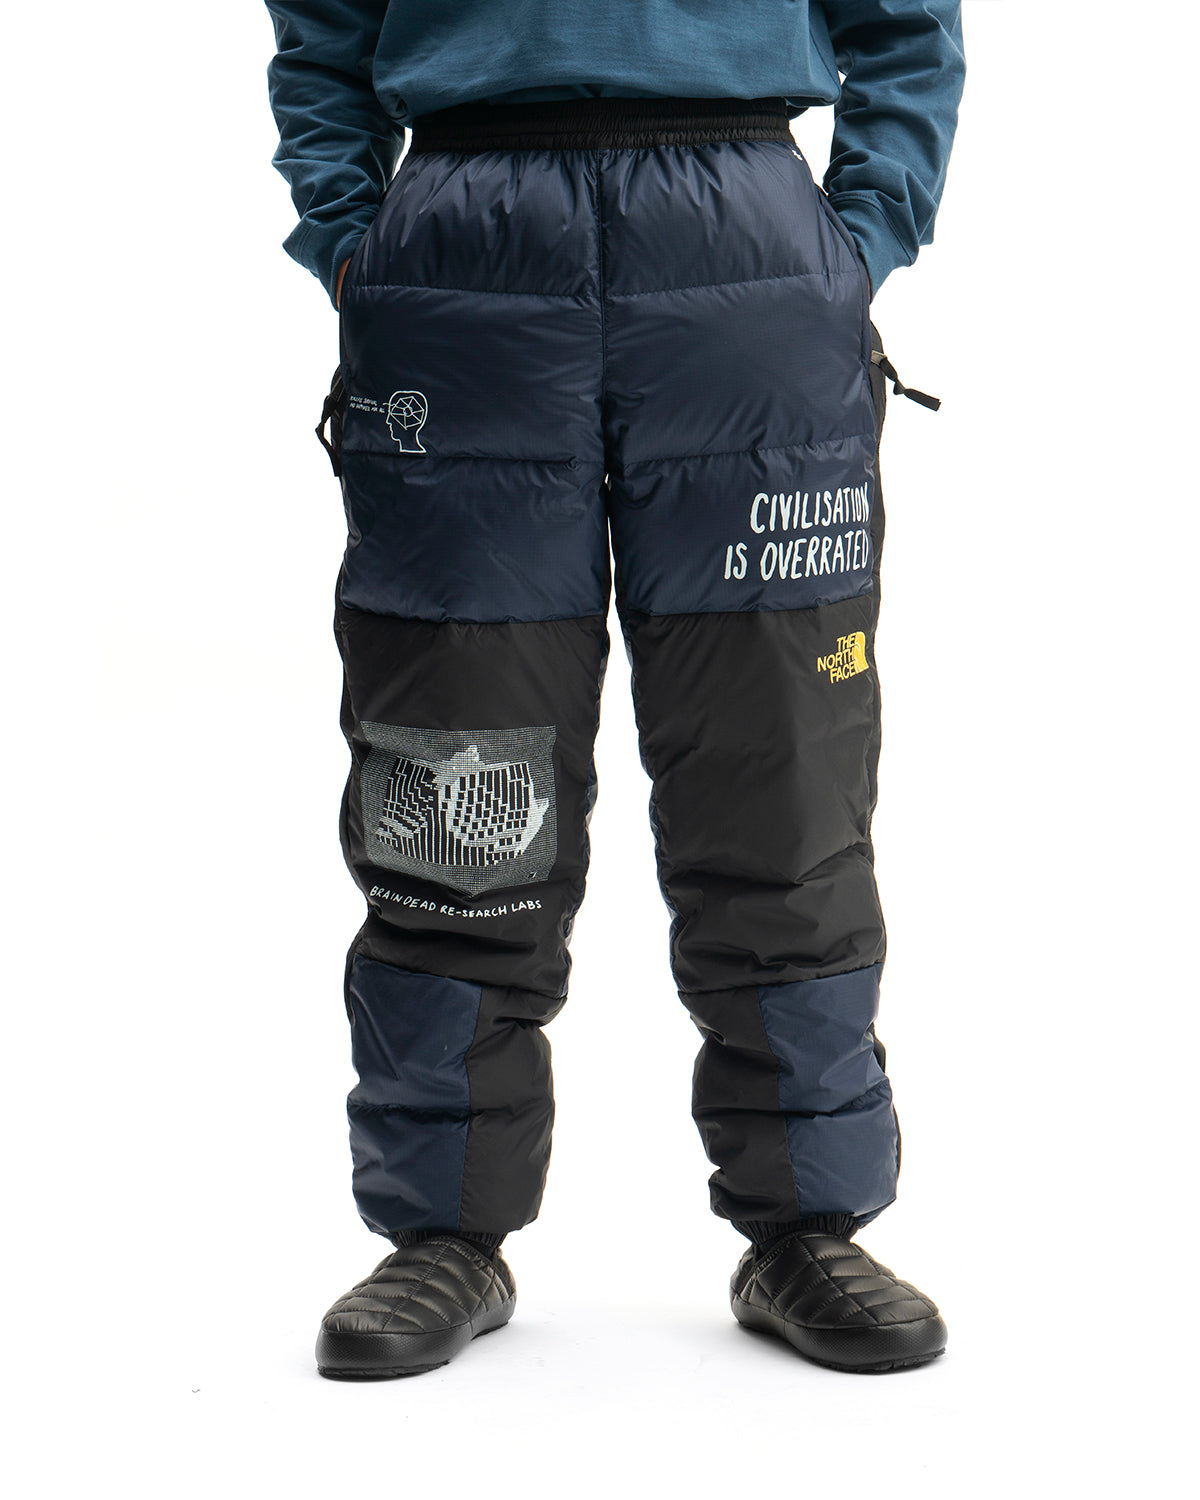 north face nuptse trousers Cheaper Than 